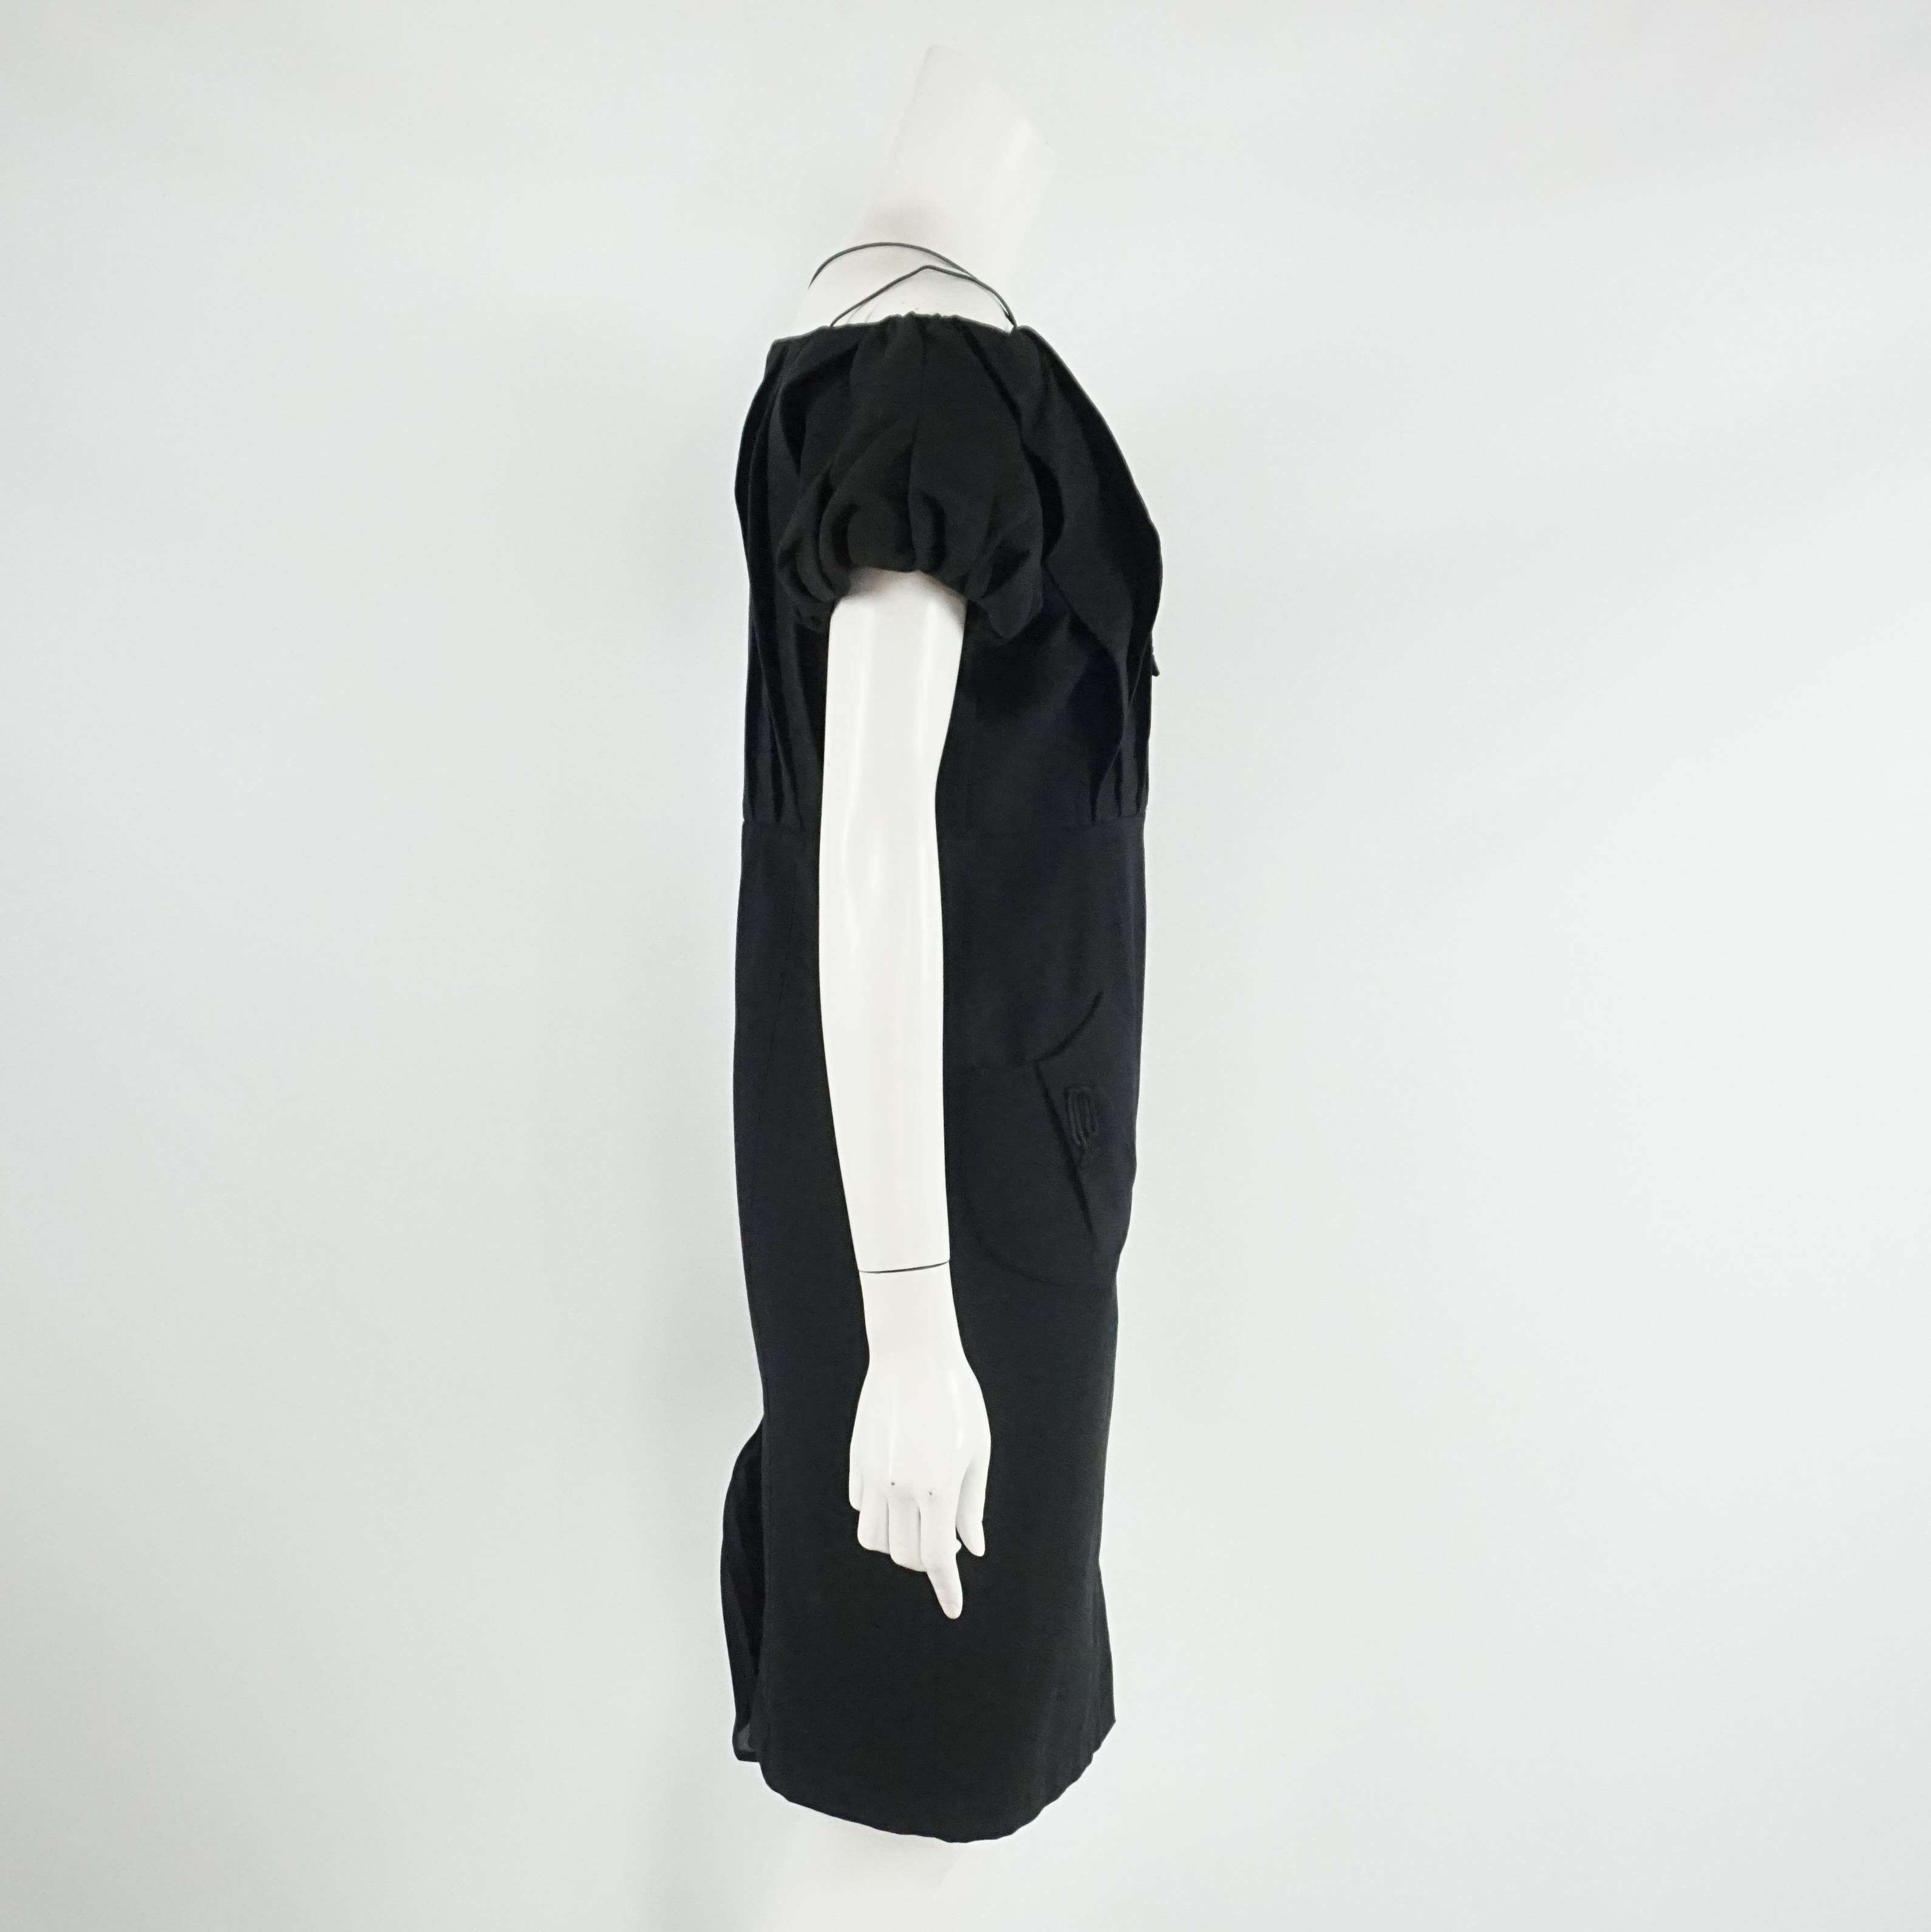 Thierry Mugler Black Pique Dress - 40 - Circa 90's This blast from the past fabulous cotton pique dress has short semi puffy sleeve, square neckline with a lace up detail along the top, snap buttons all the way down the front, two path pockets,